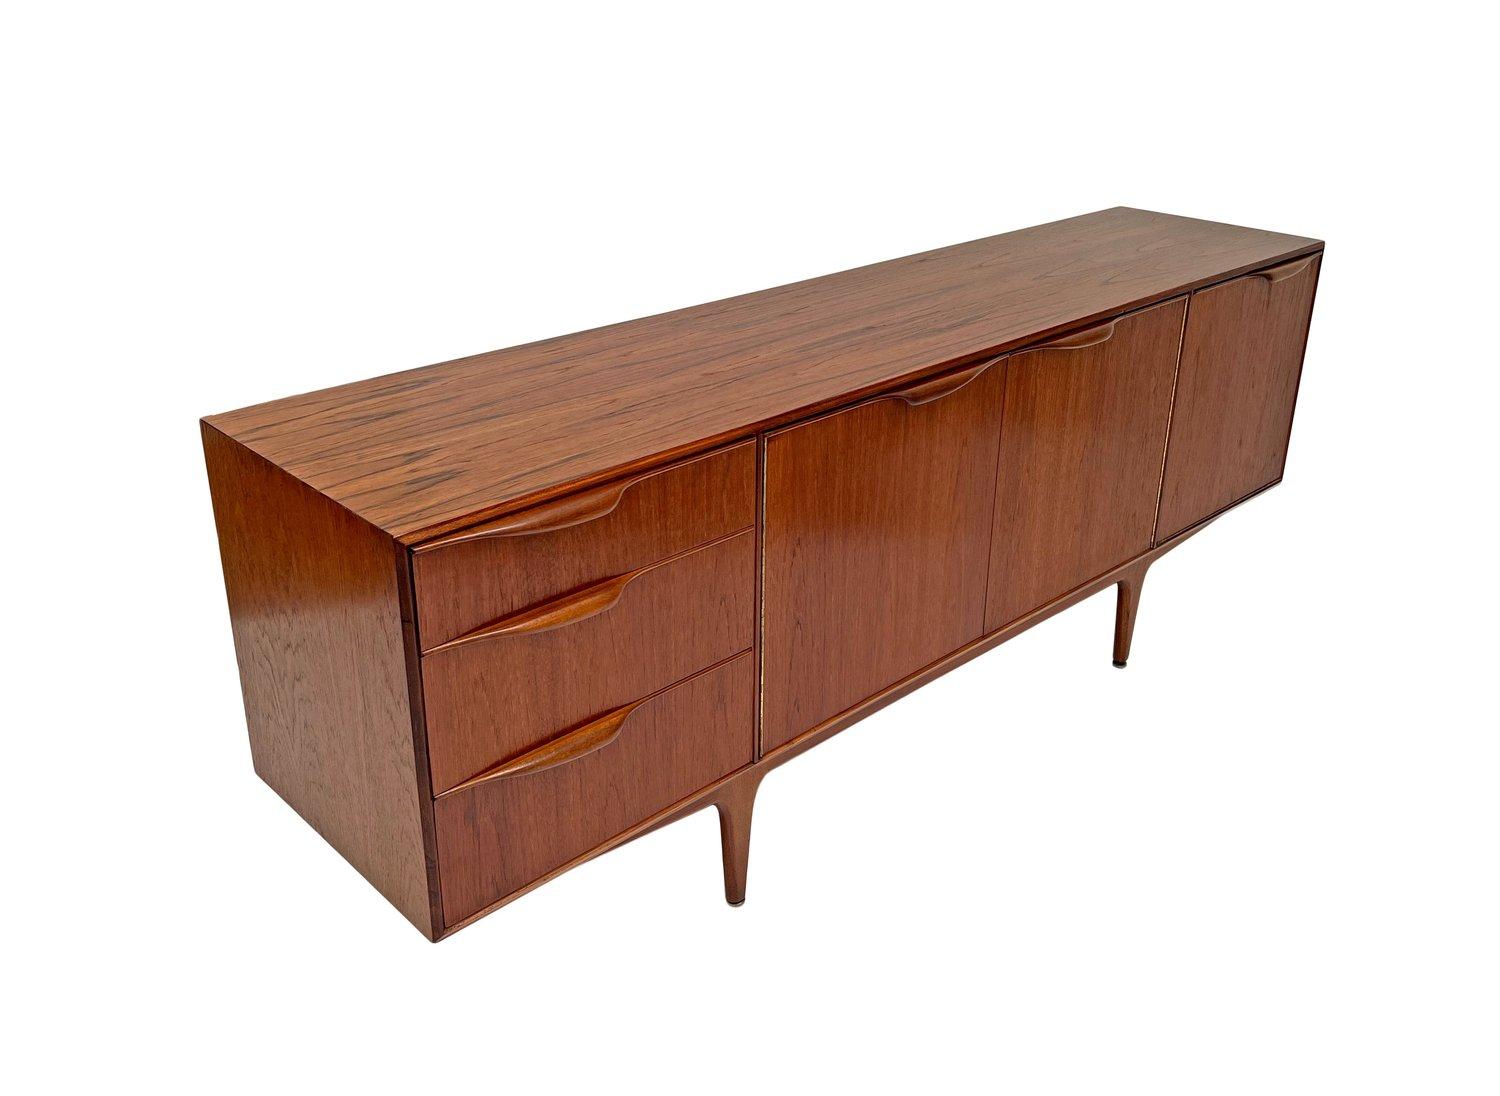 A beautiful British teak sideboard ‘Dunvegan’ by A.H McIntosh of Kirkcaldy, this would make a stylish addition to any living or work area.

The sideboard has a drop down cupboard with shelf to the right, two cupboards to the centre and a bank of